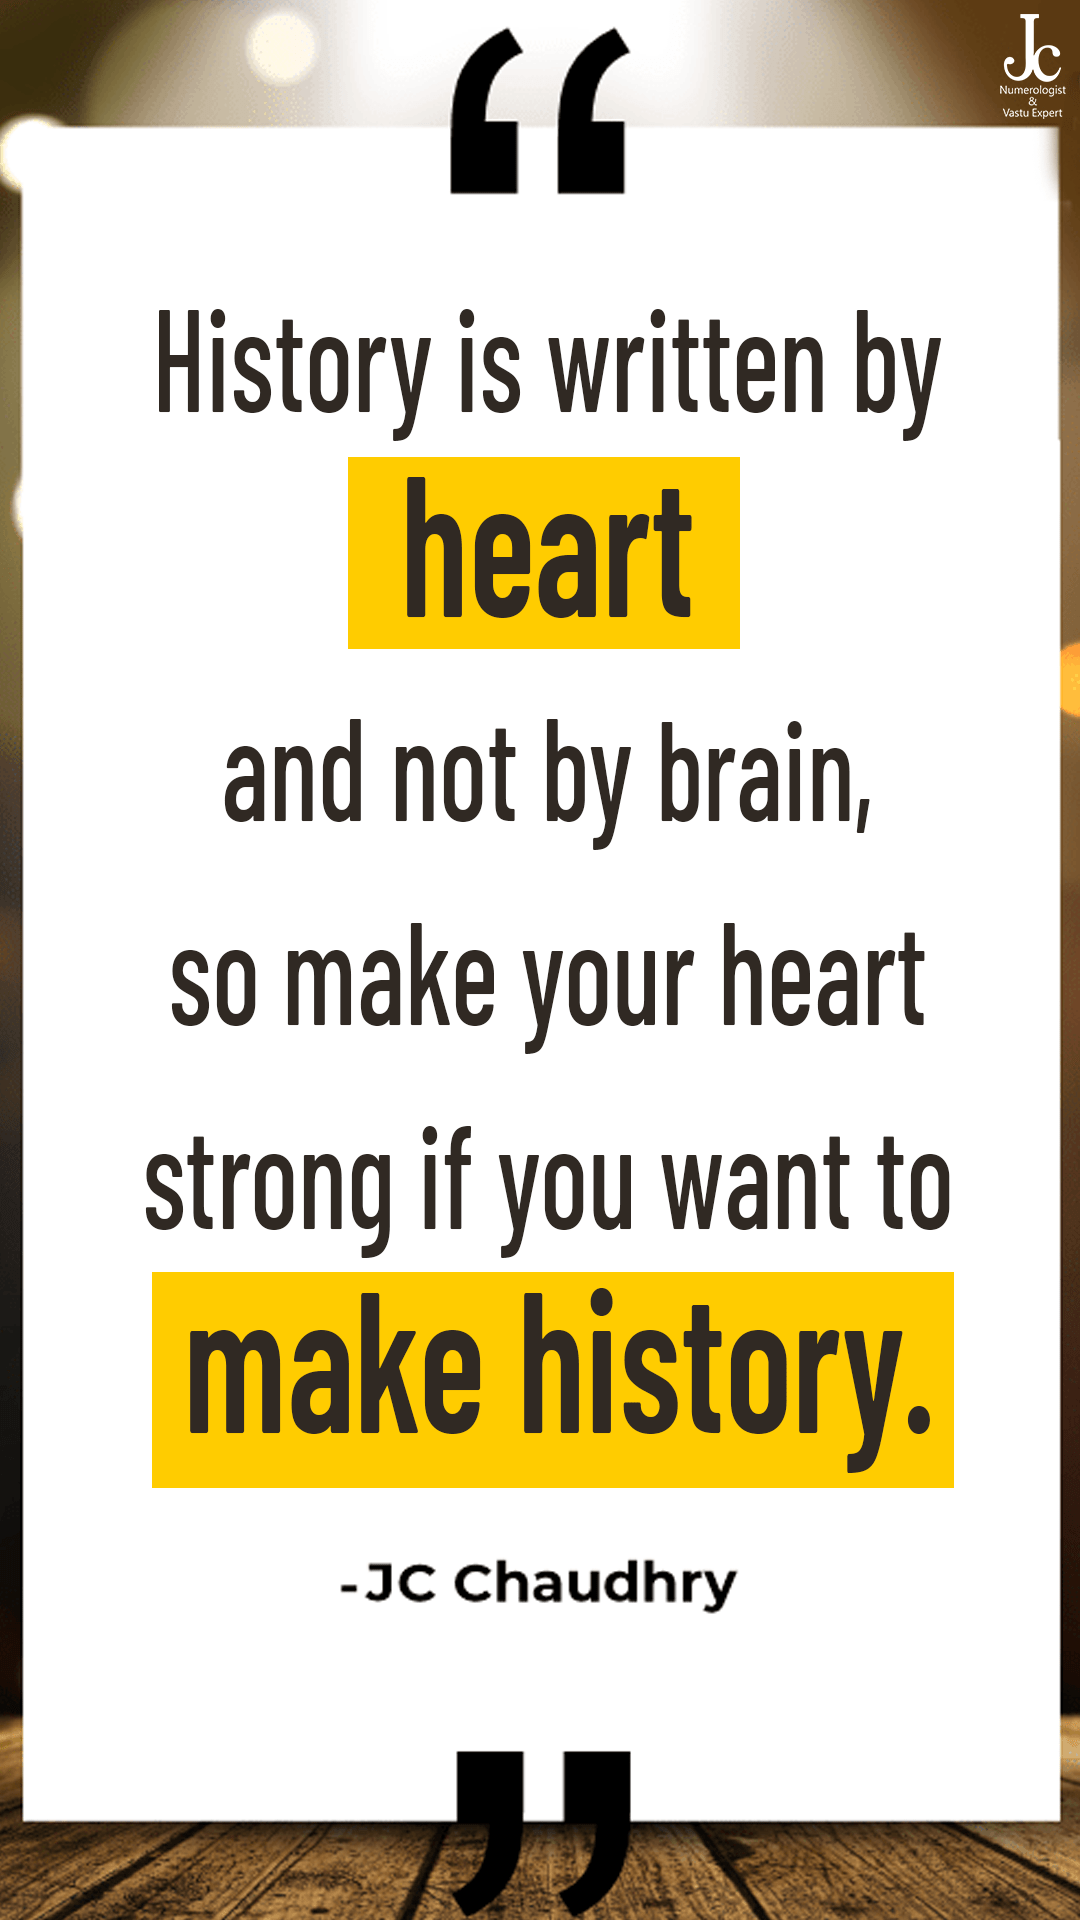 “History is written by heart and not by brain, so make your heart strong if you want to make history.”